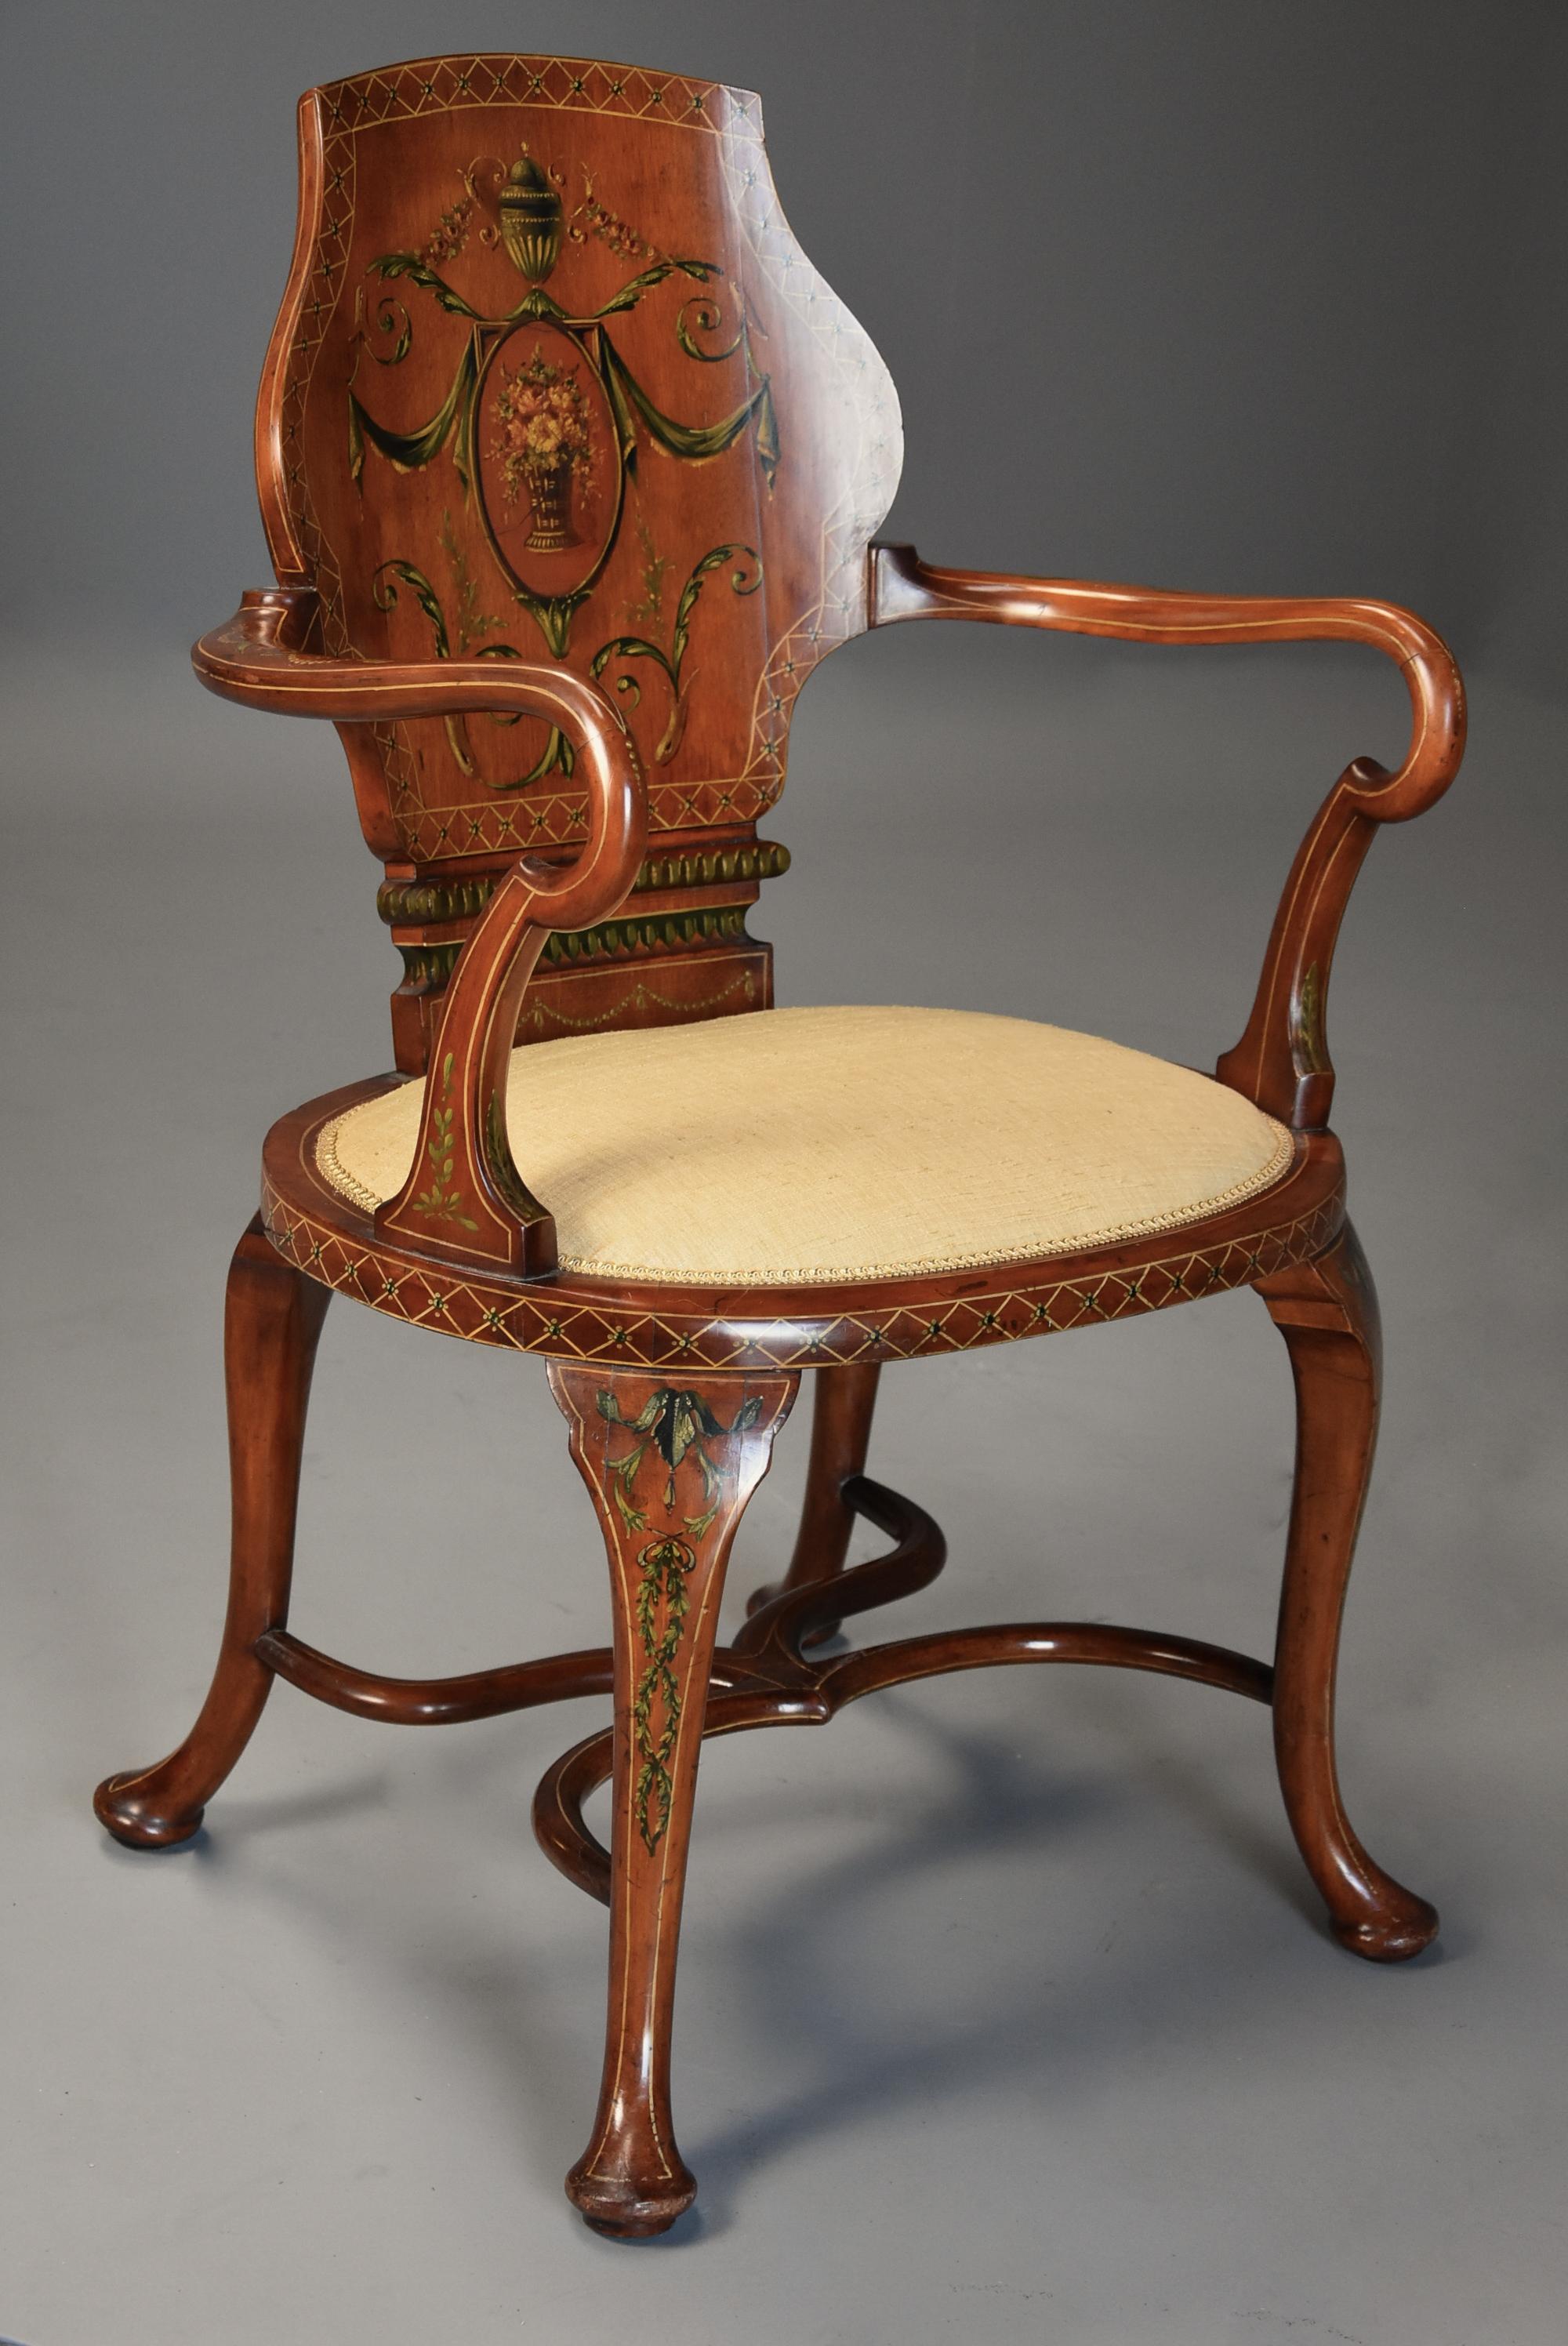 A highly decorative Edwardian satinwood and painted armchair in the Georgian style. 

This armchair consists of a satinwood concave shaped back in the form of a shield, this being a typical Georgian style, with finely painted Classical decoration